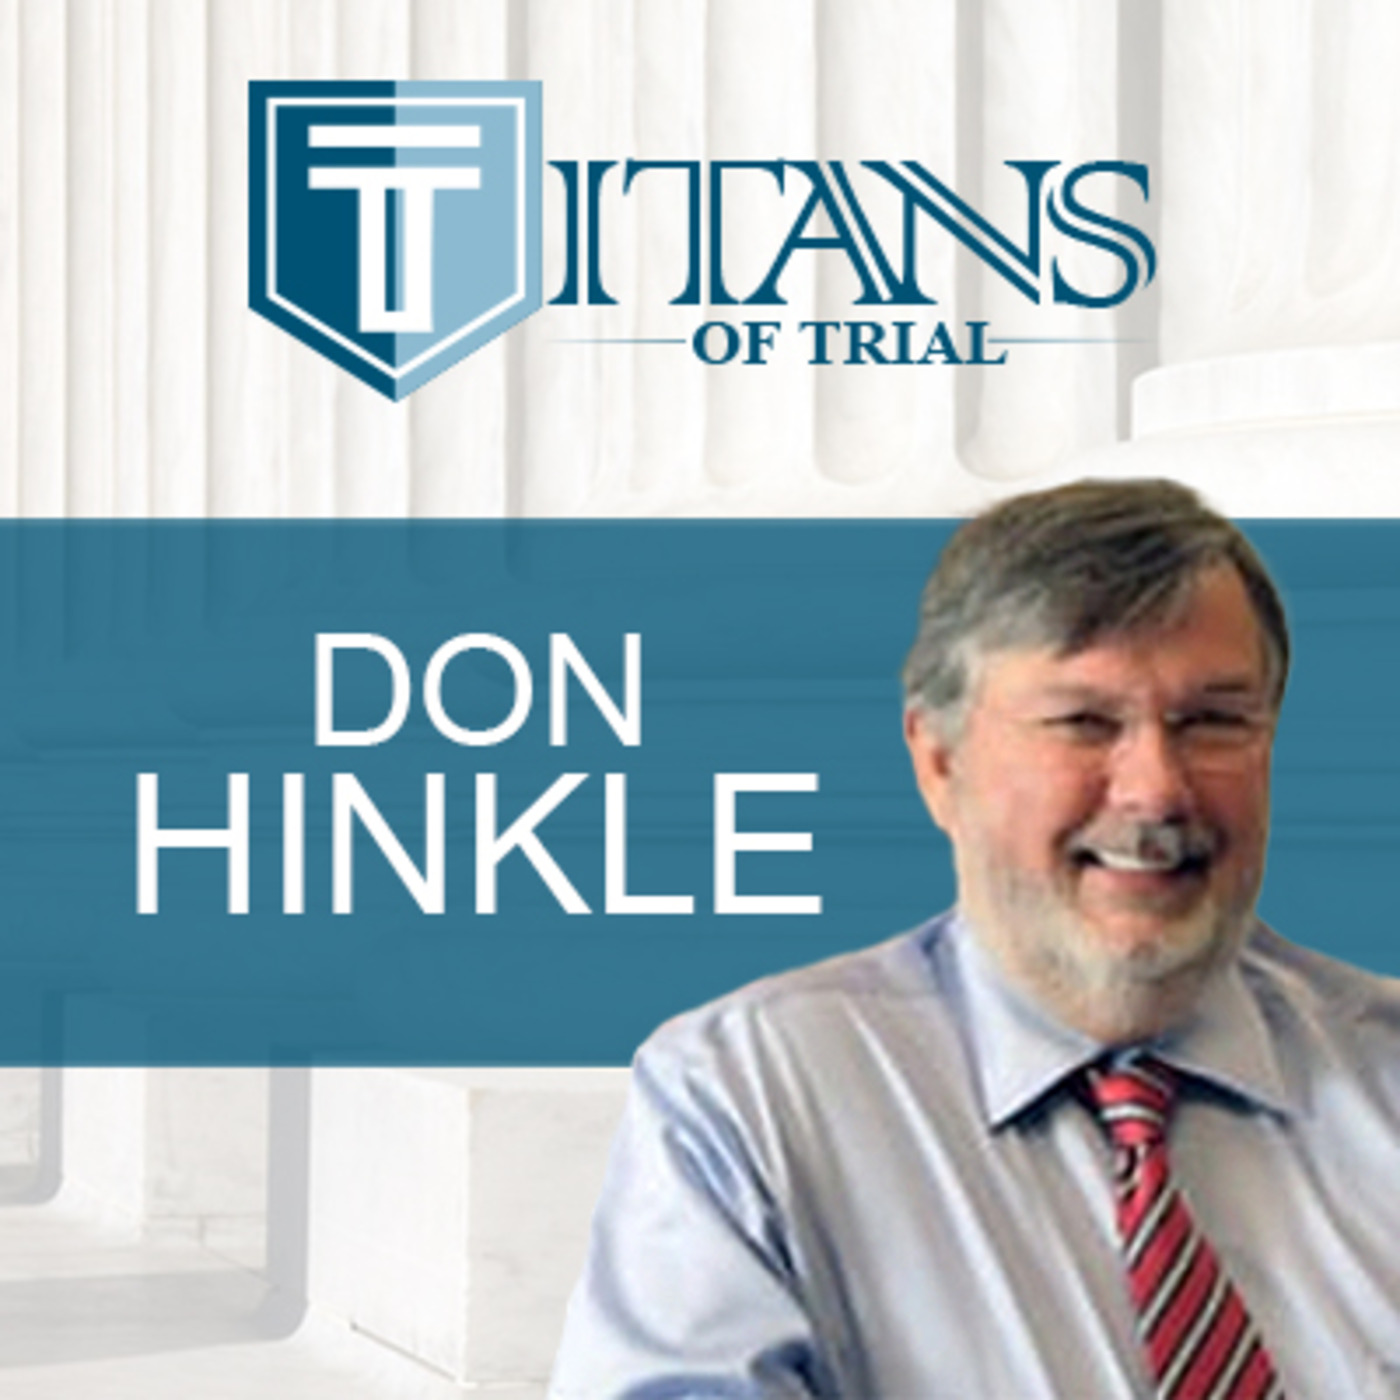 Titans of Trial - Don Hinkle